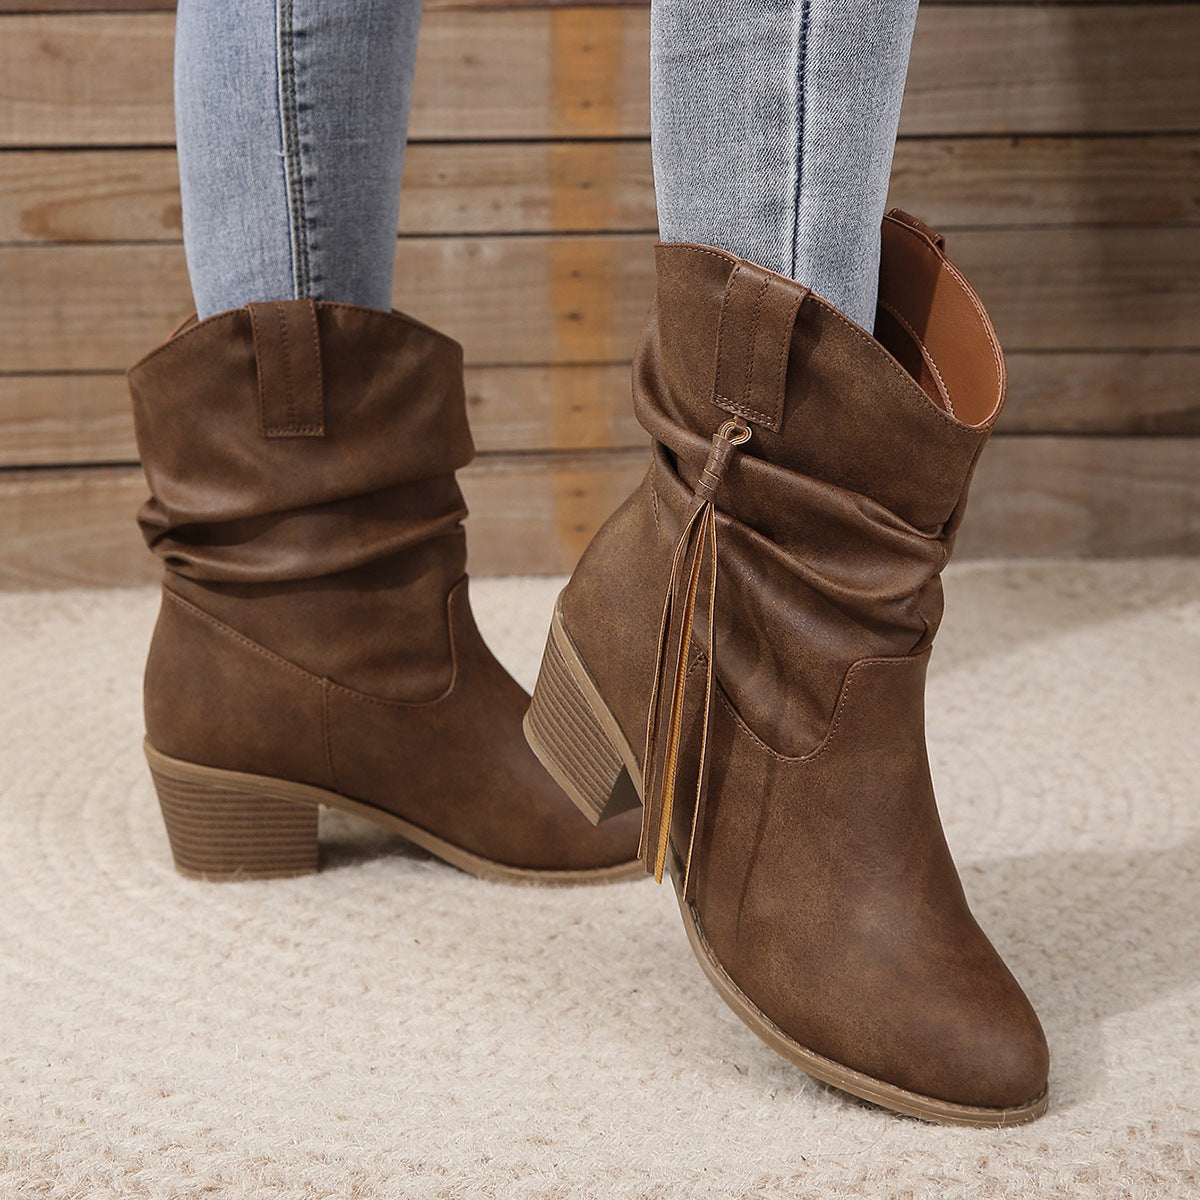 Retro Tassel Boots Winter Thick Square Heel Mid-calf Knight Western Boots Woman Fashion Shoes